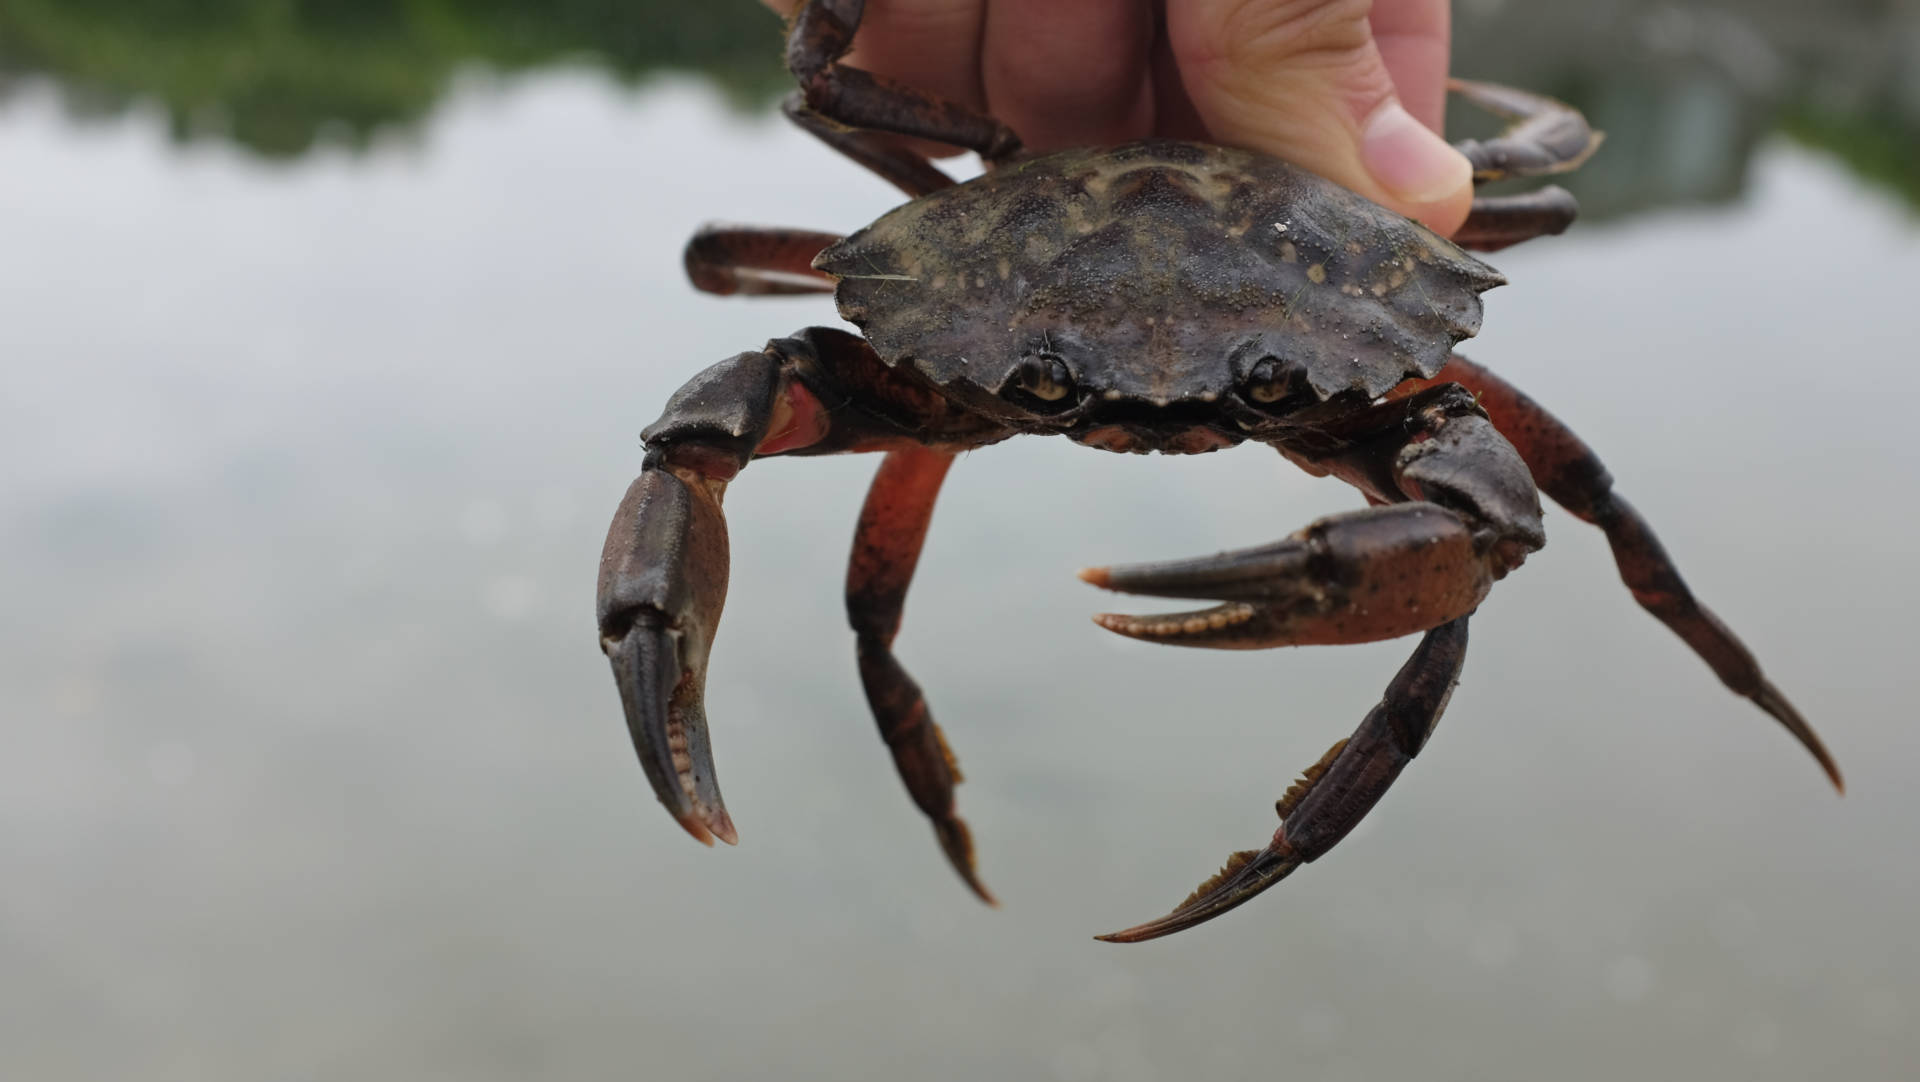 Ecologists Strike Back Against Invasive Green Crabs